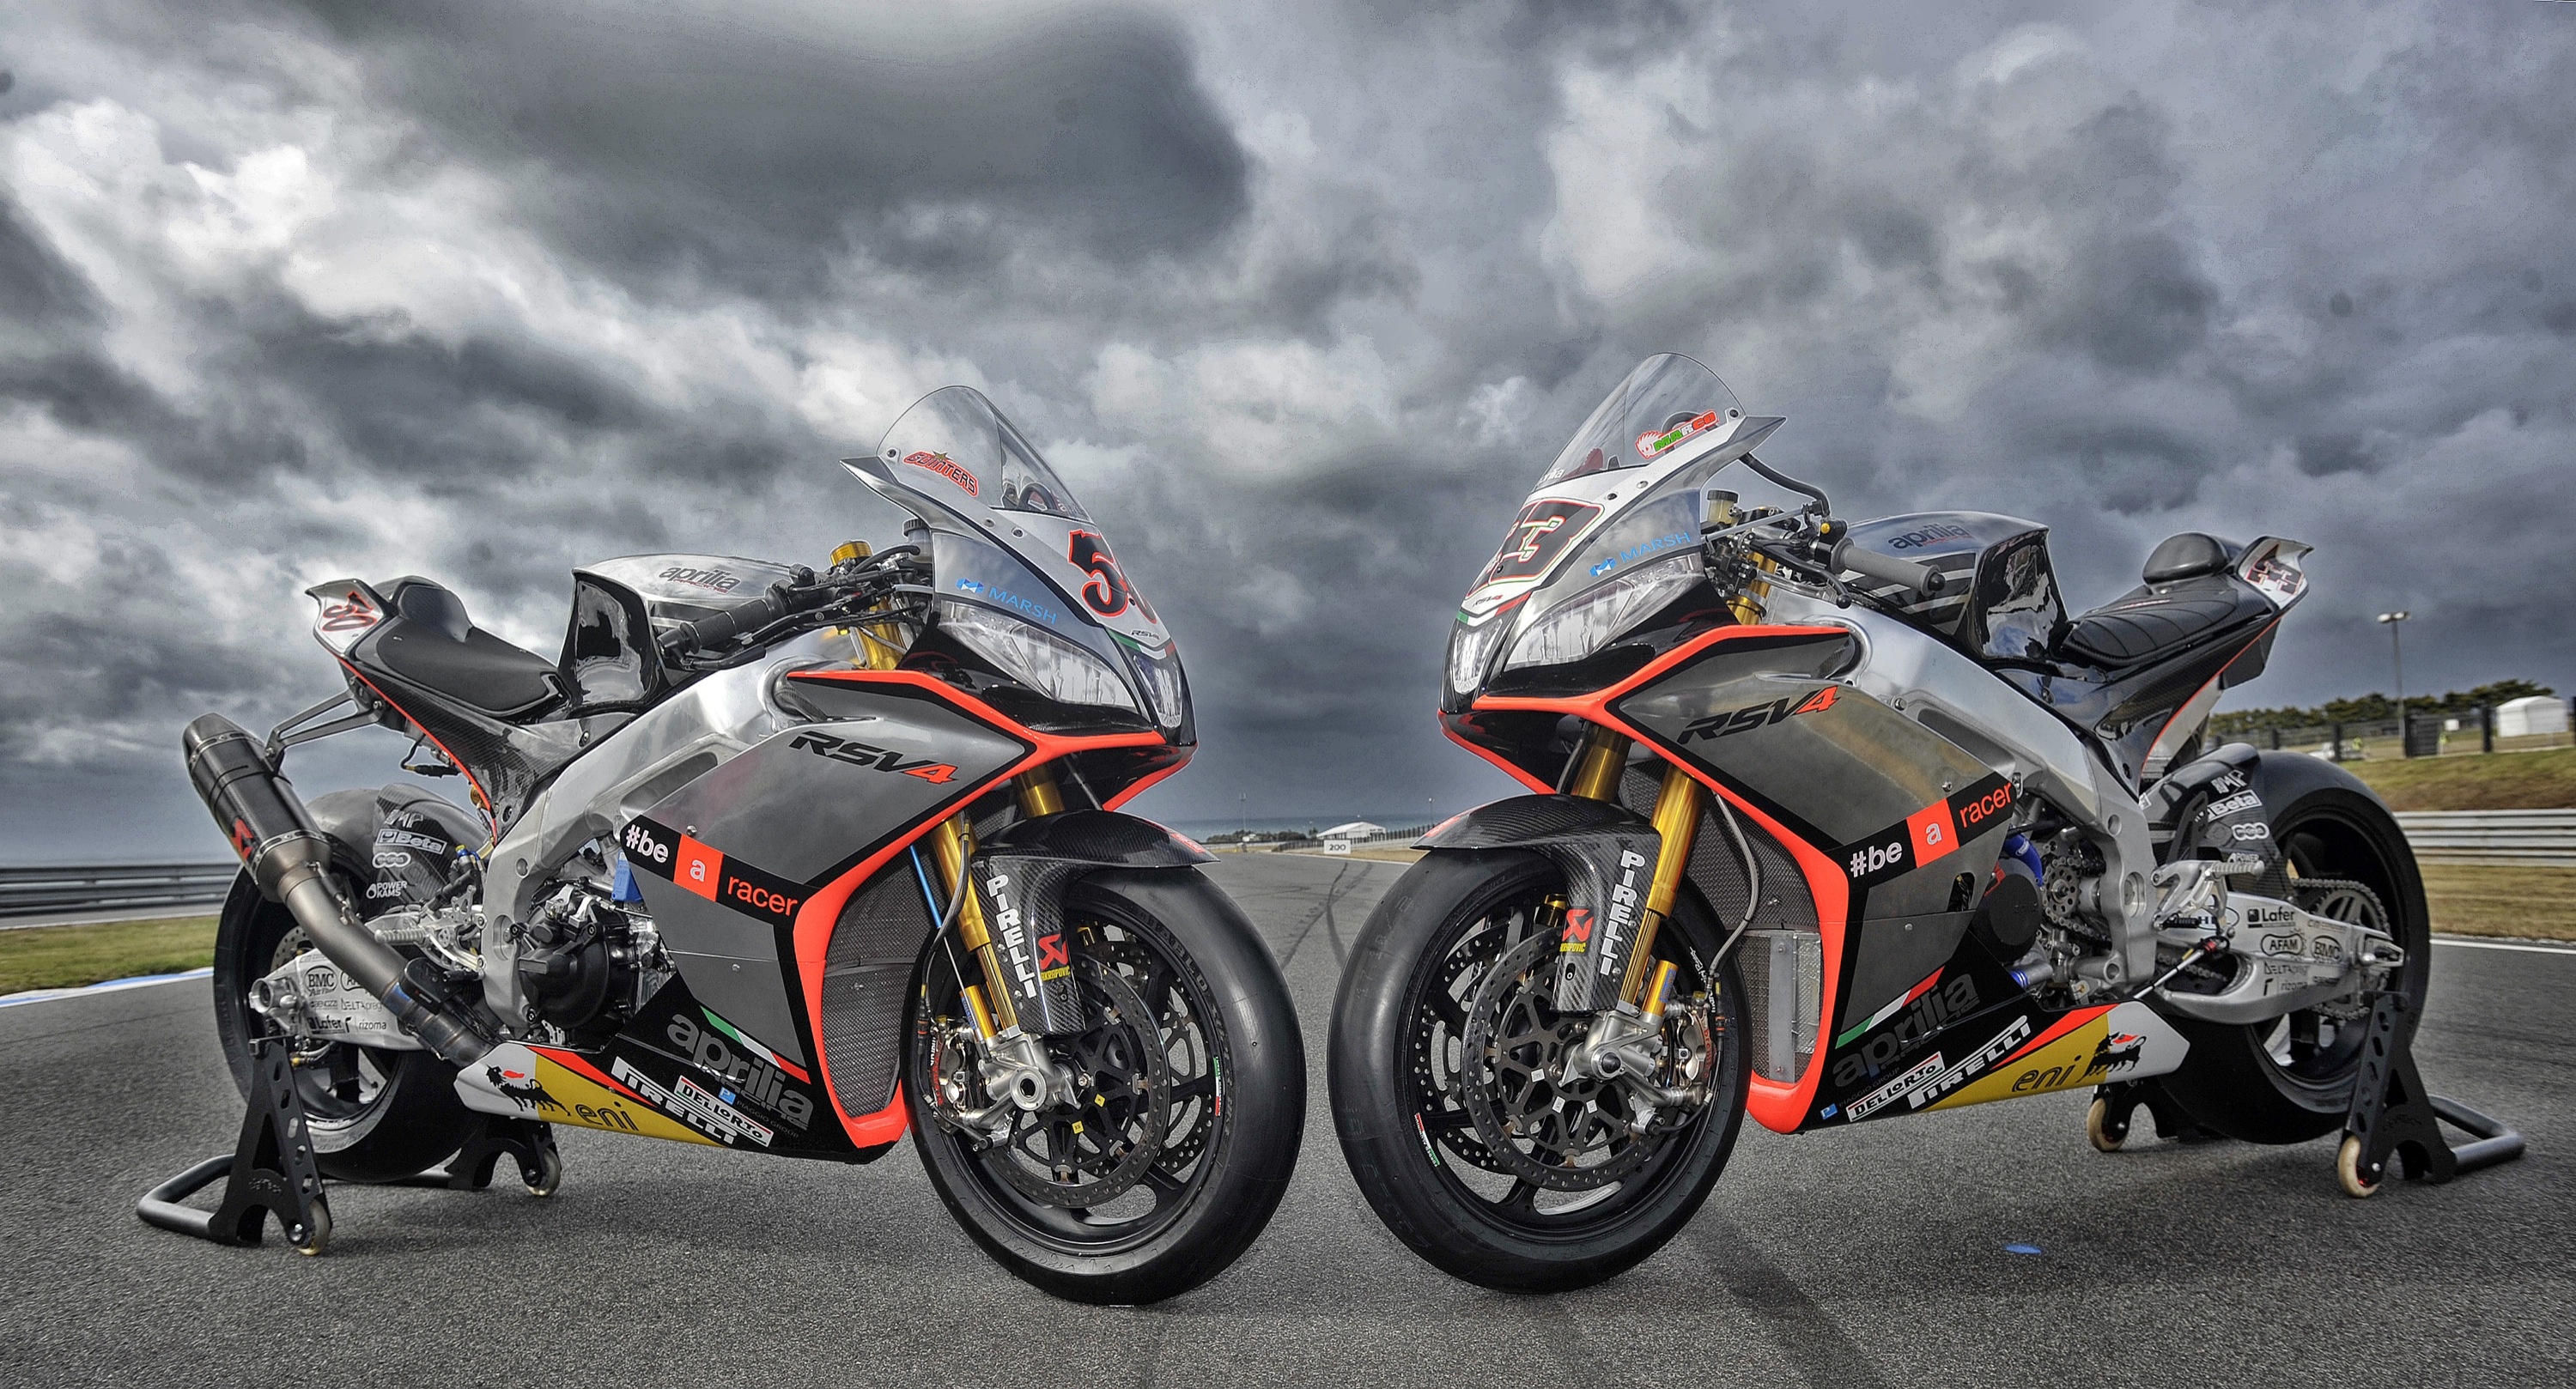 Aprilia RSV4 wallpapers, High-quality images, Desktop and mobile, Motorcycle wallpapers, 3000x1620 HD Desktop